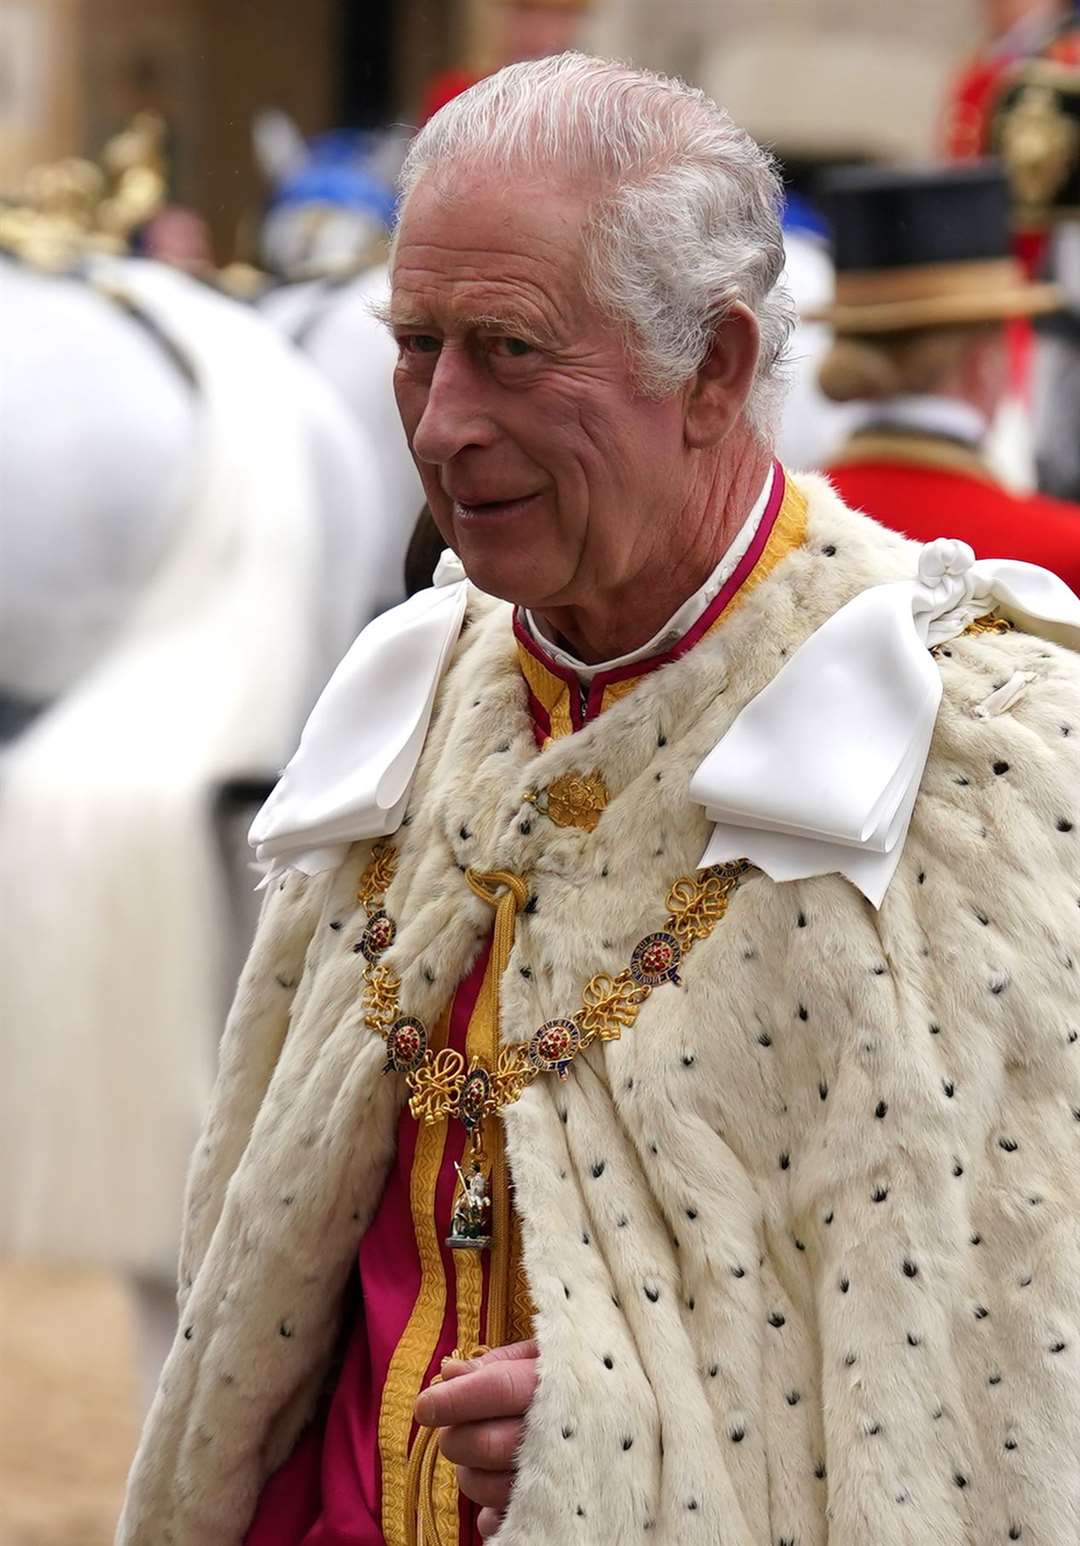 The King arriving at Westminster Abbey (Andrew Milligan/PA)